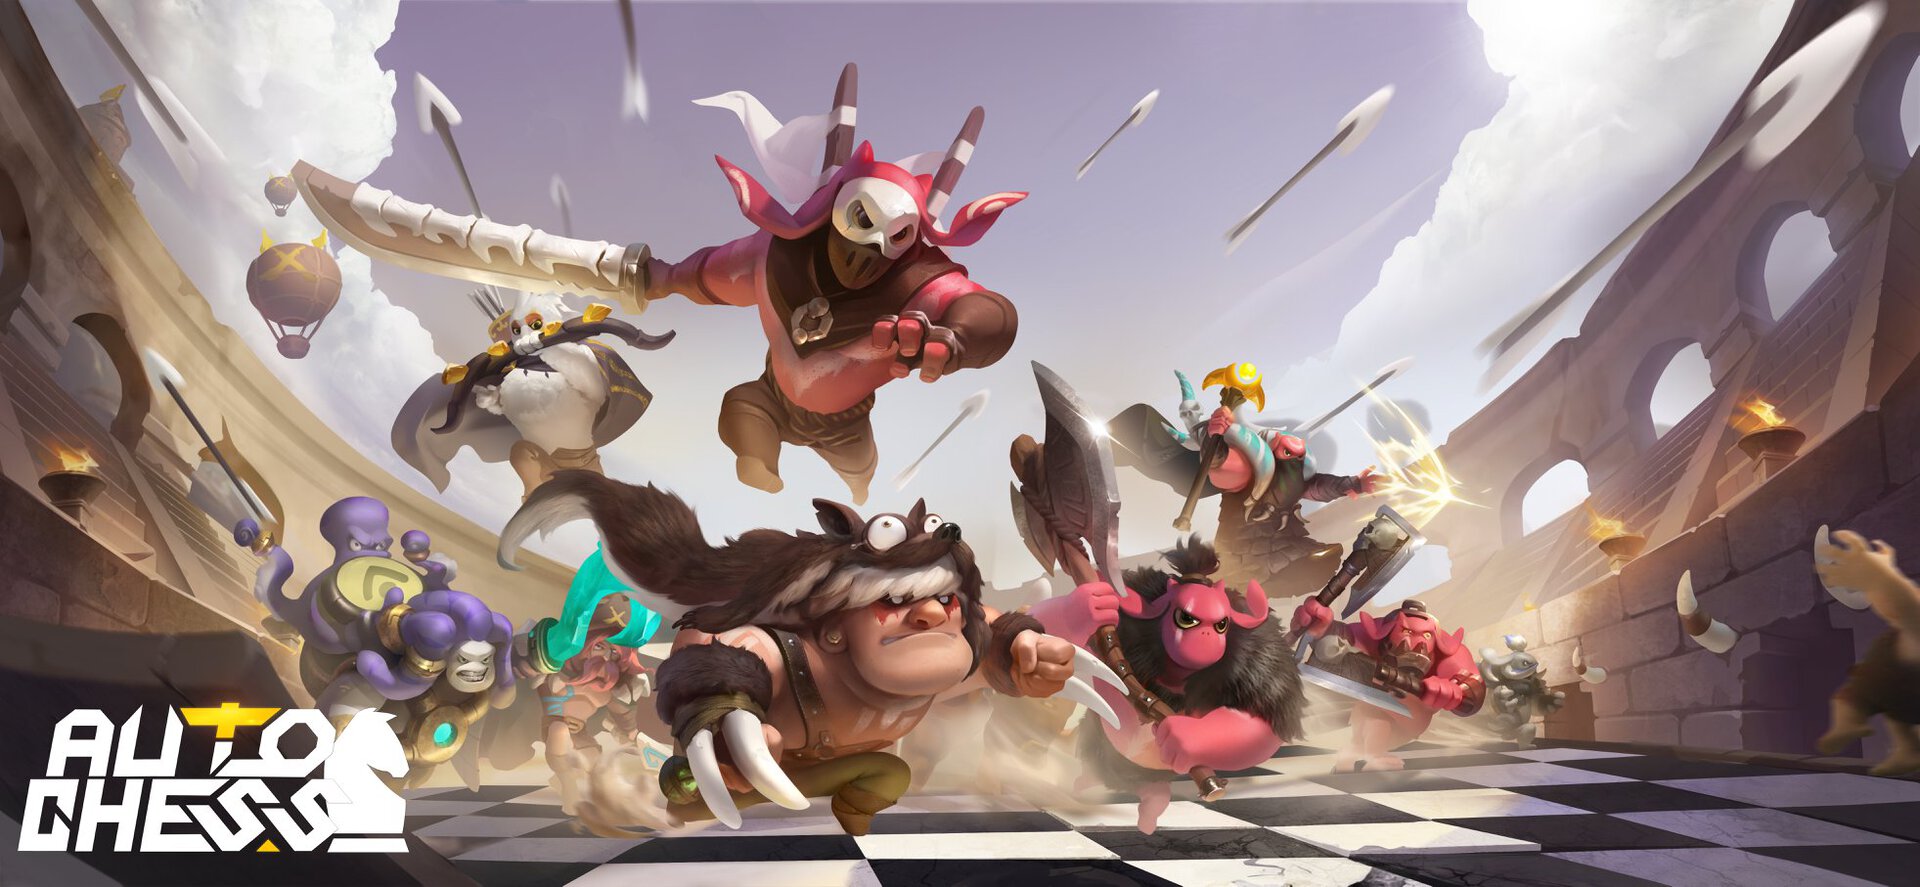 Auto Chess beginner's guide: From novice to grandmaster - Android Authority